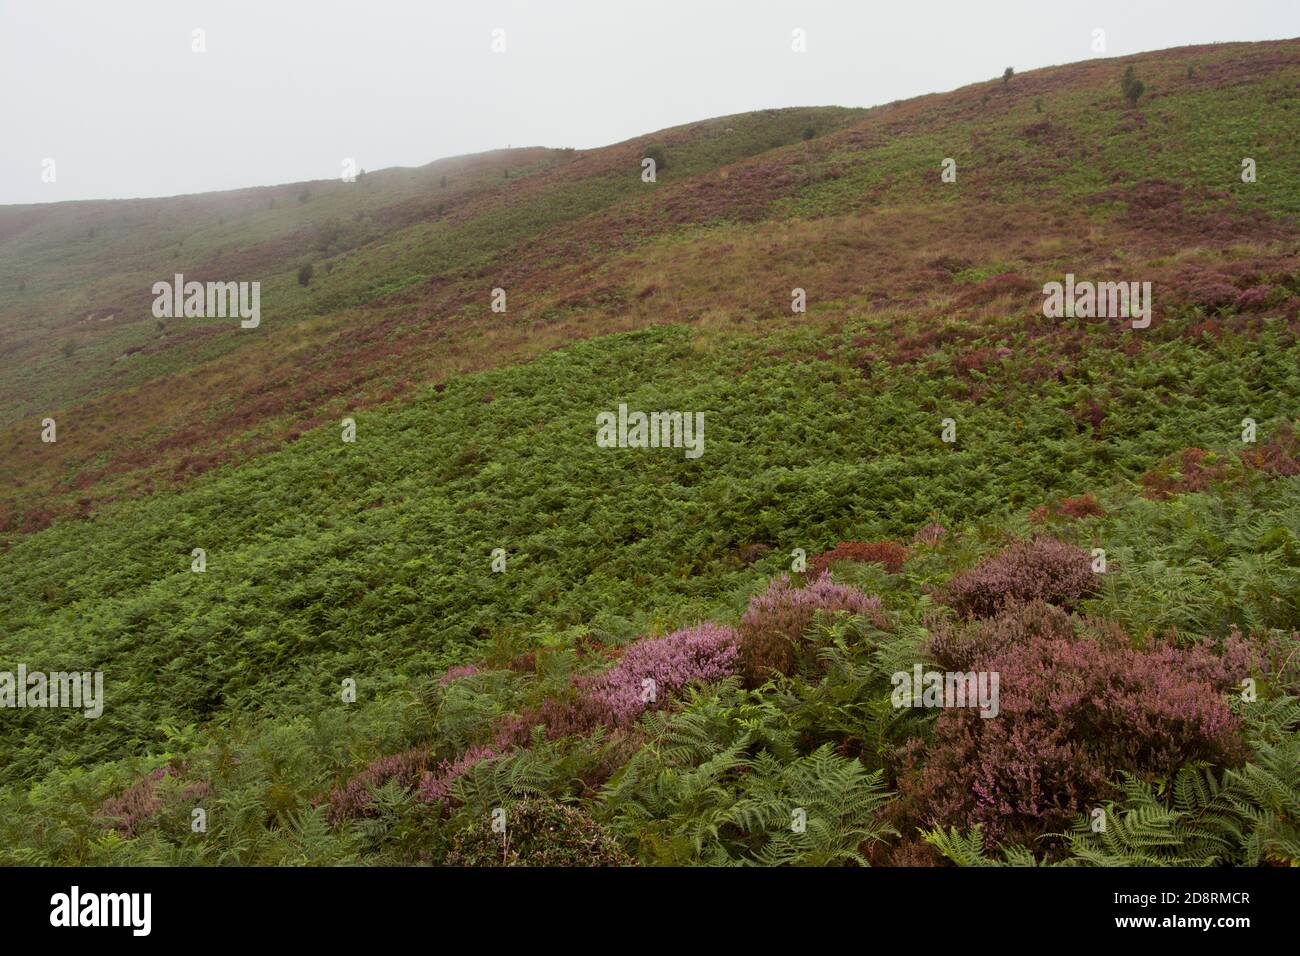 The Hills of Jugger Moor turn purple in summer as the Heathers flower and make the landscape change in character. Windswept and bleak in winter Stock Photo